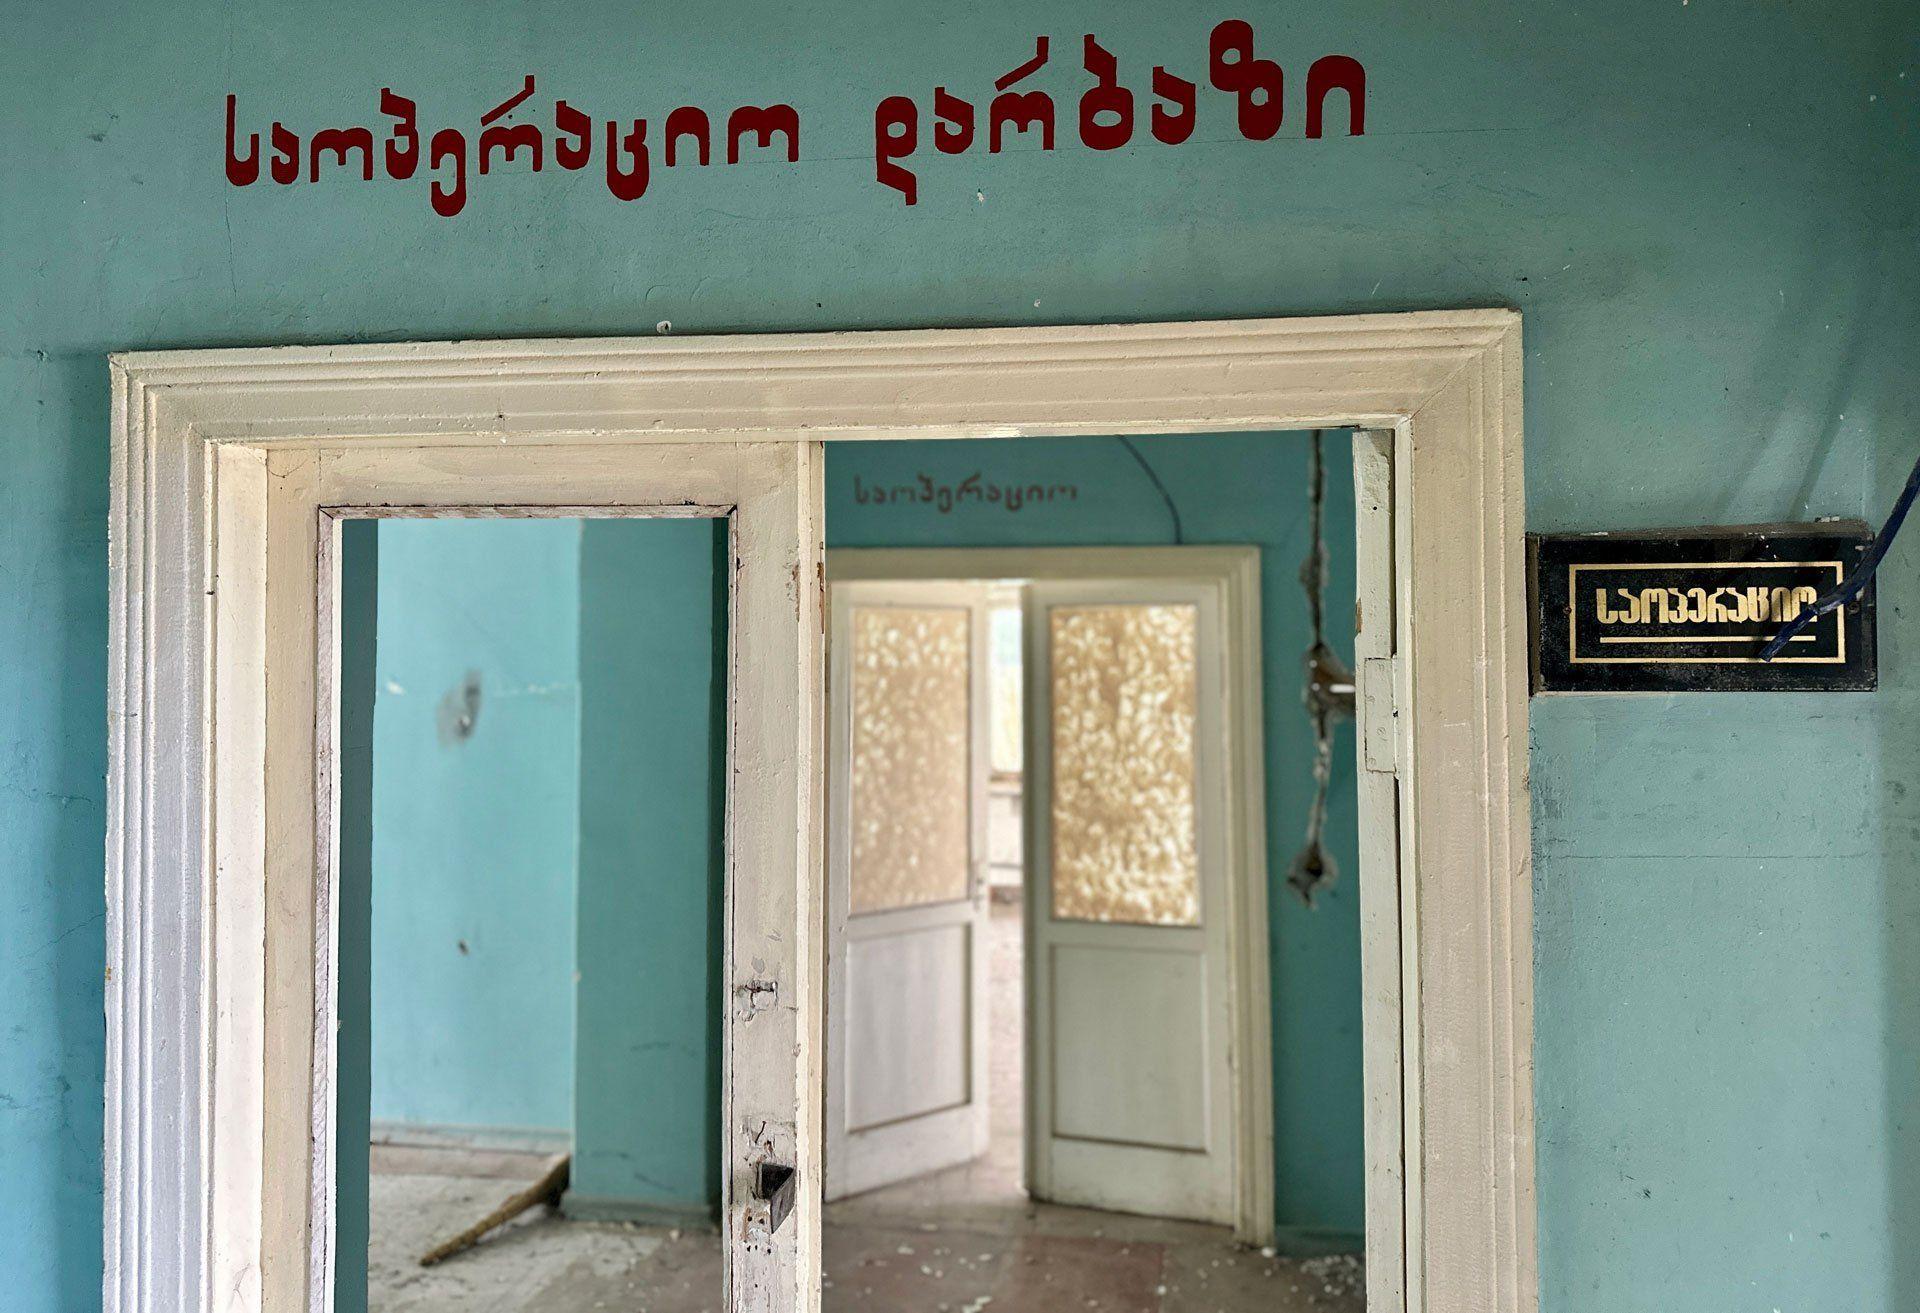 A Georgian sign over a hallway in a derelict hospital